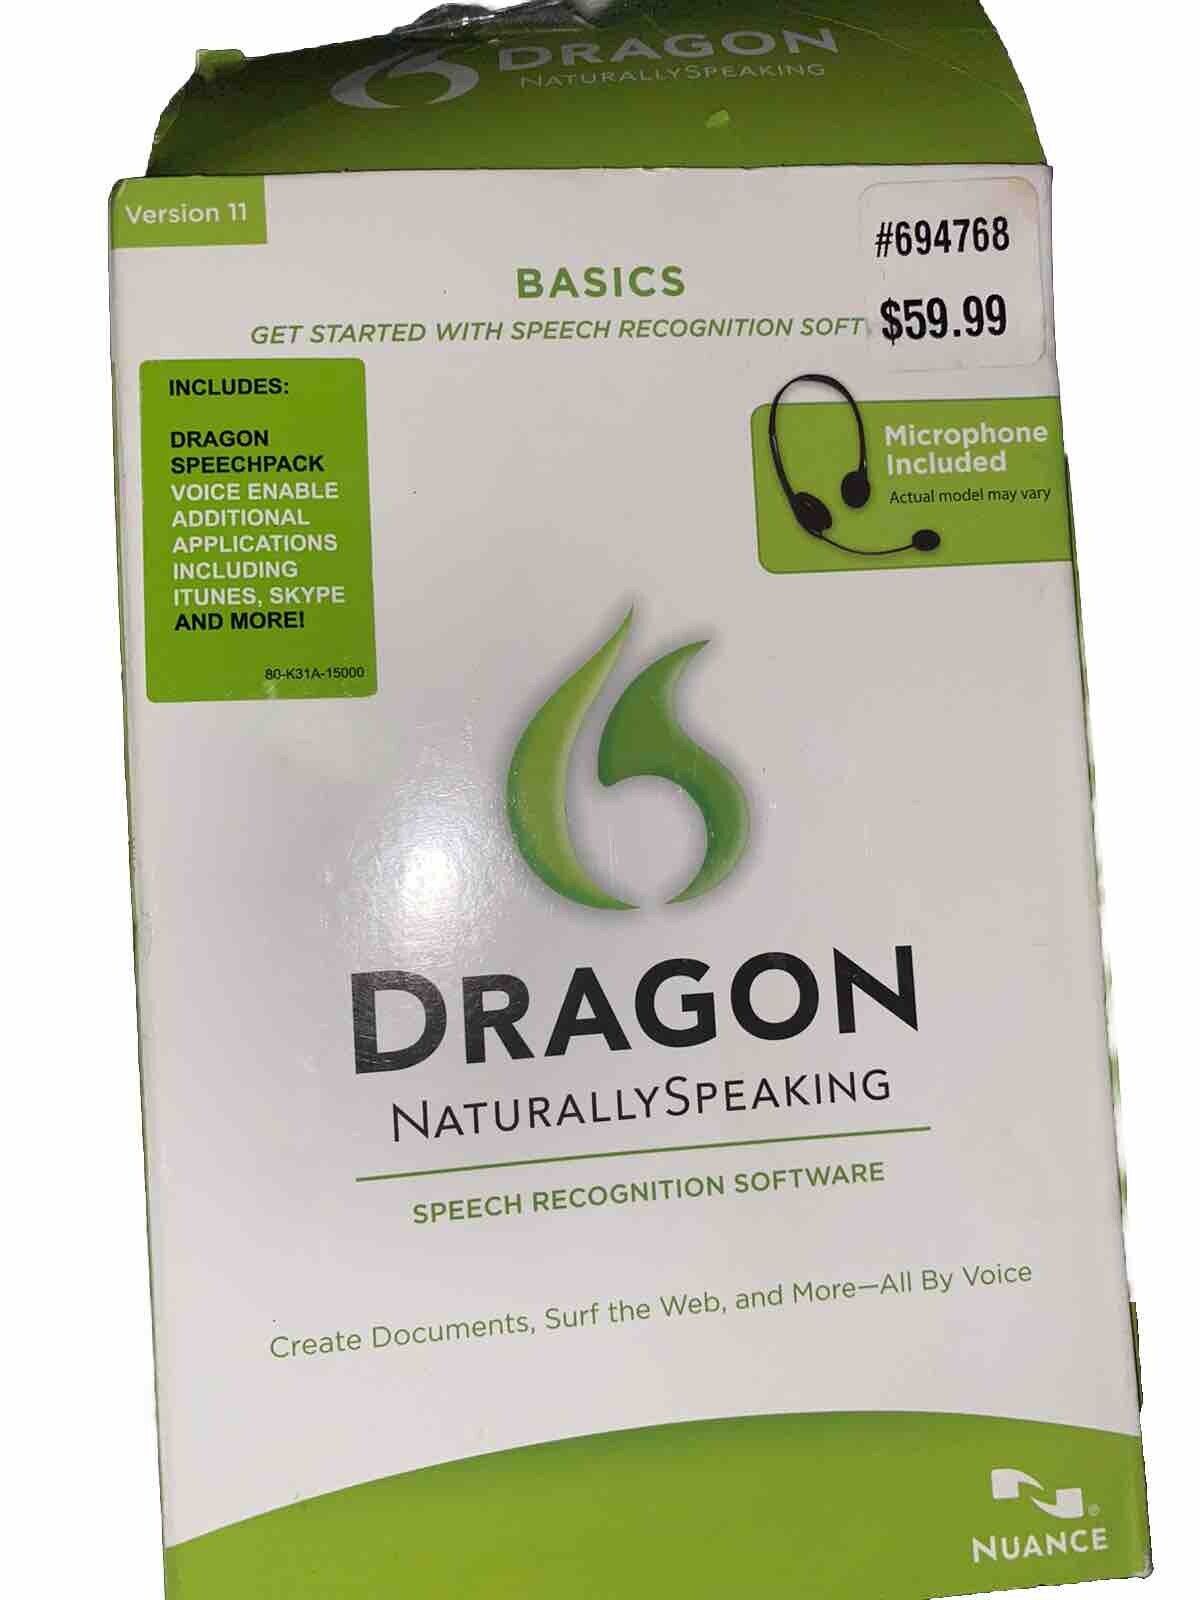 Dragon NaturallySpeaking Speech Recognition Software Basics Version 11 By Nuance